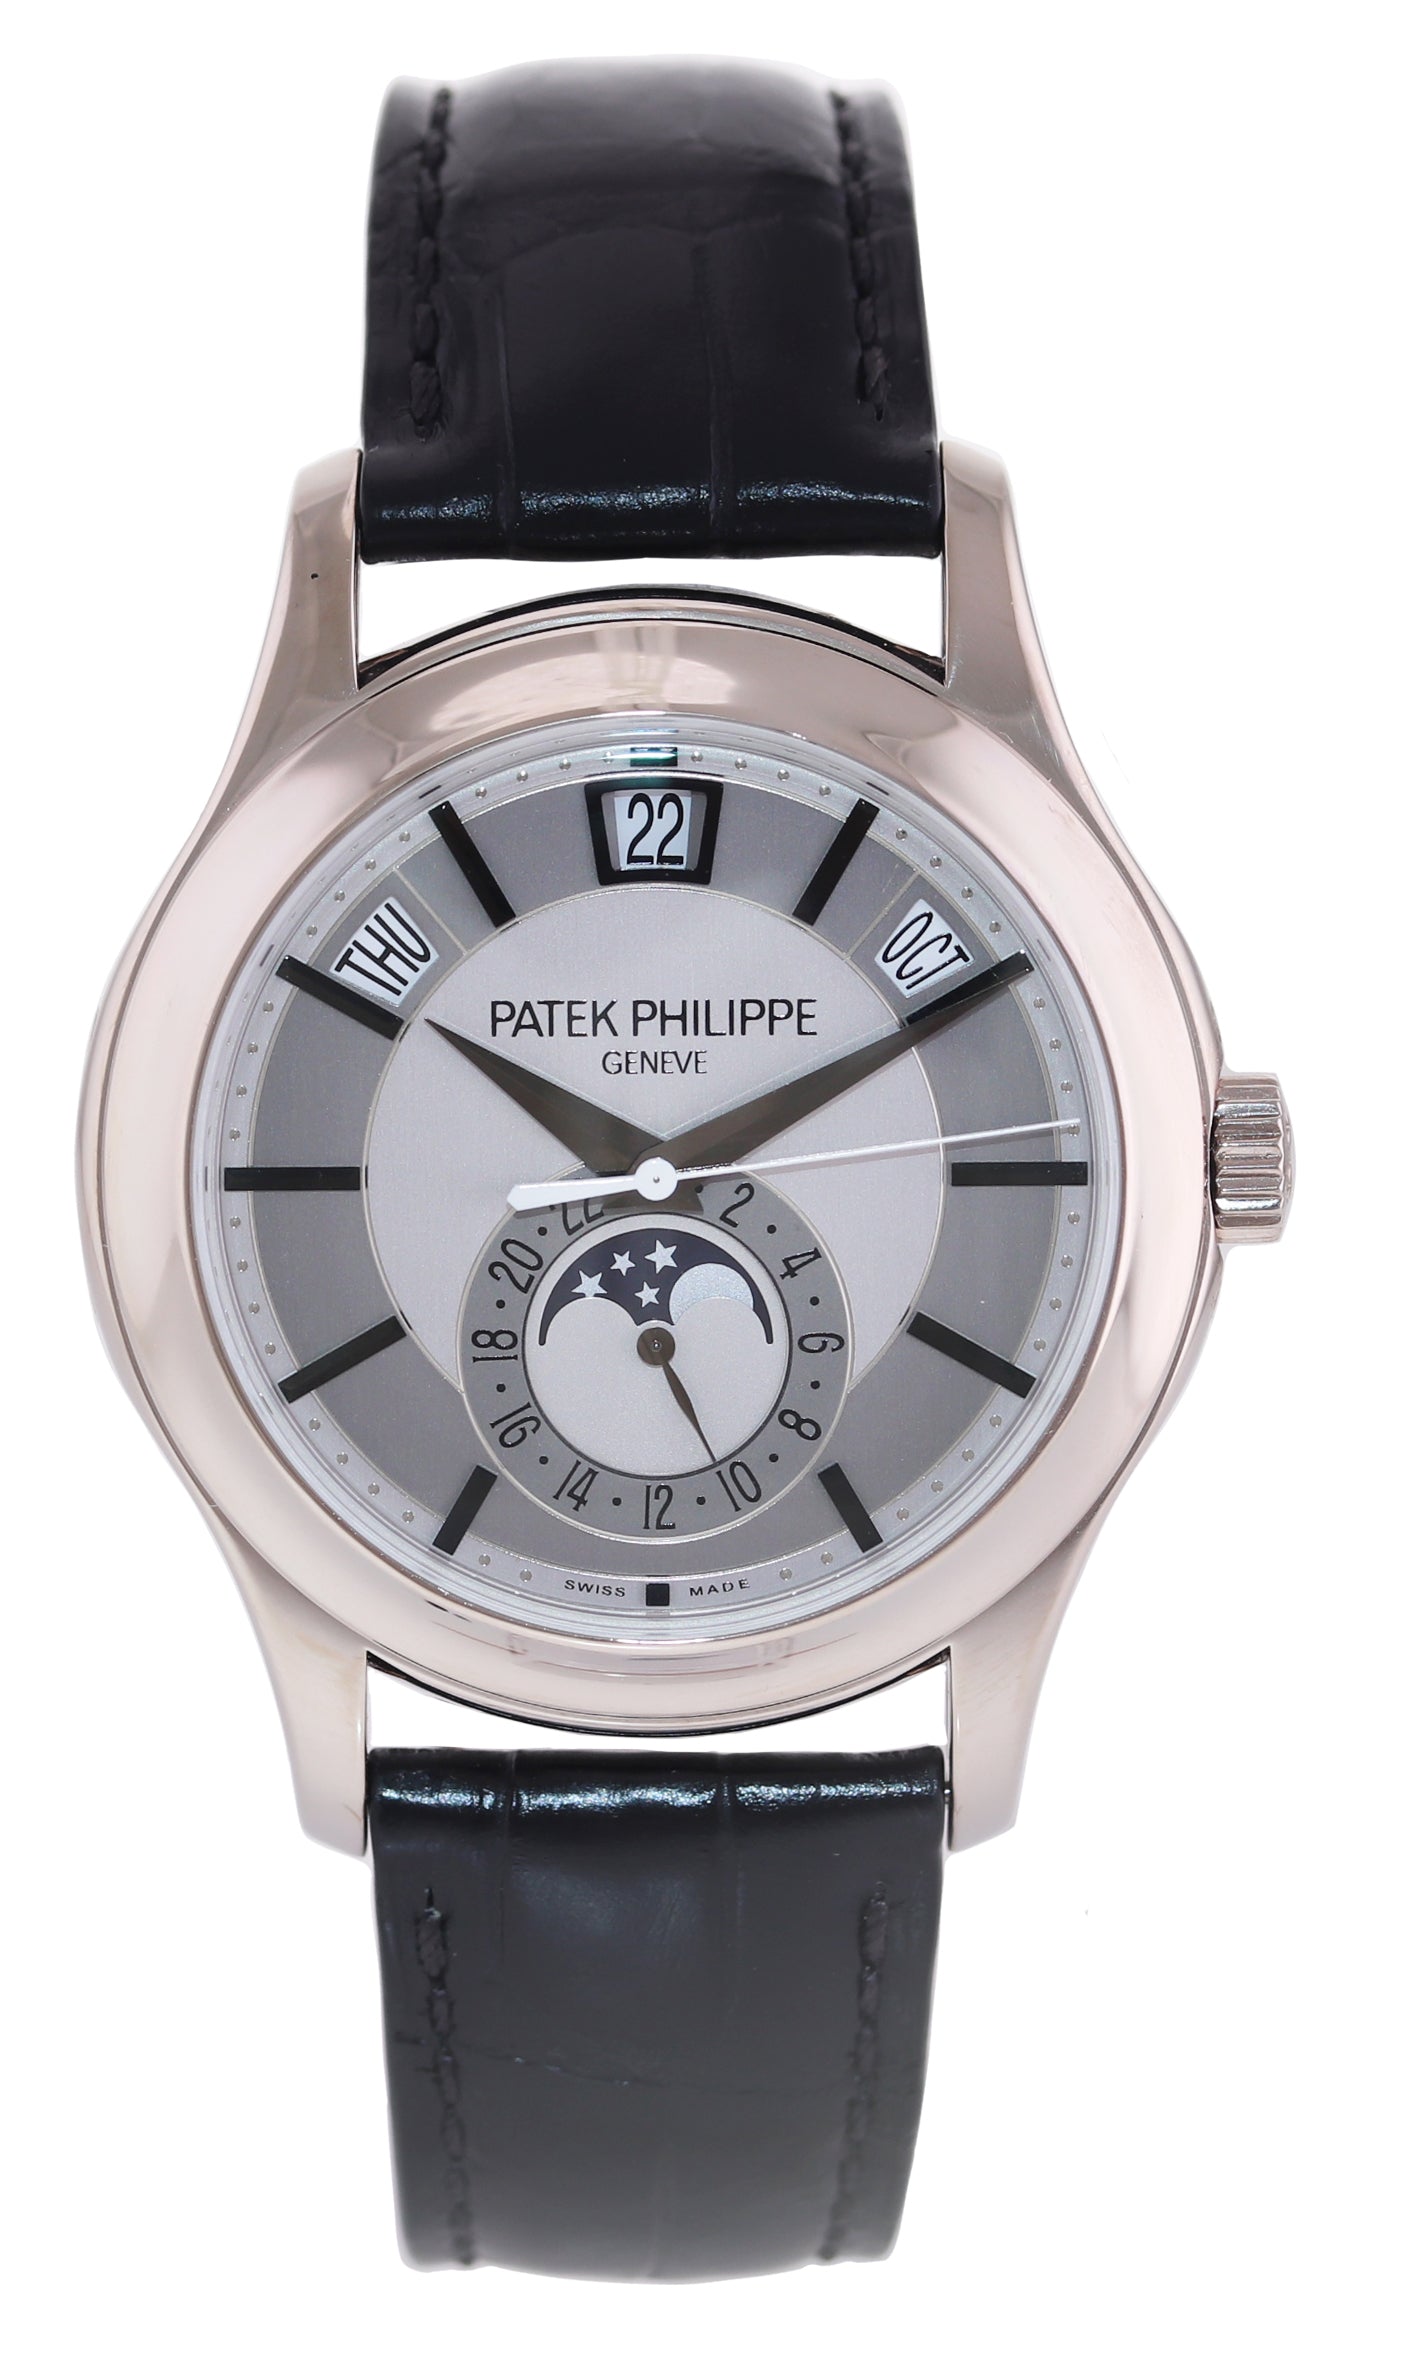 2013 PAPERS Patek Philippe 5205G White Gold Annual Calendar Moon Phase Grey Watch